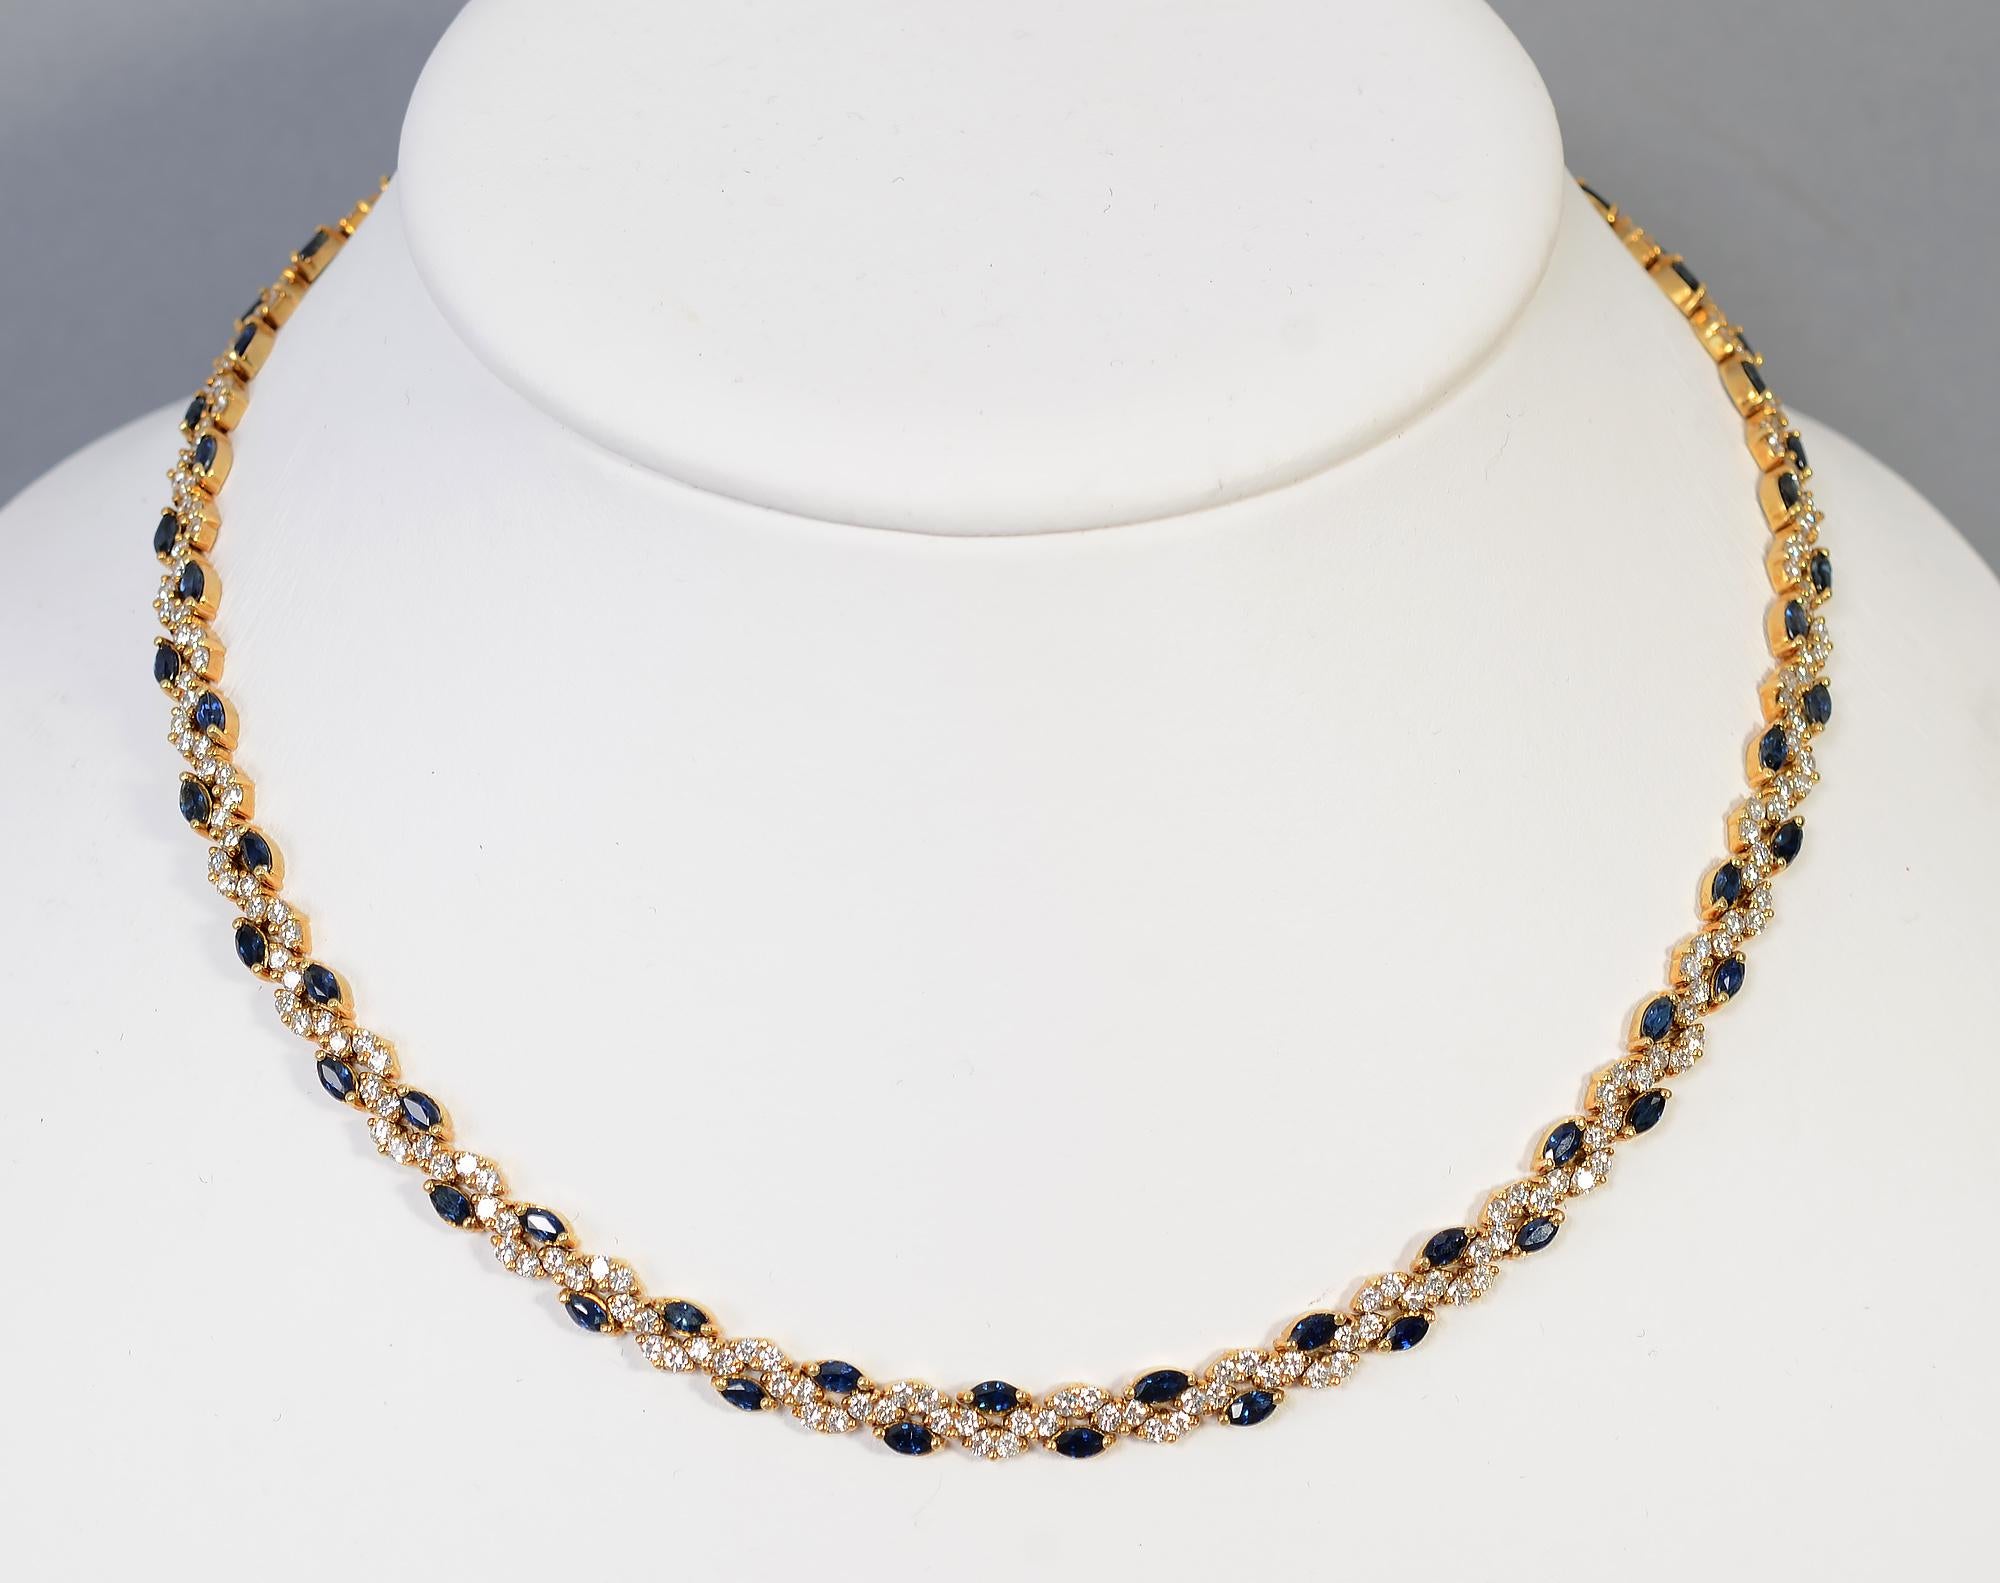 Elegant choker necklace by Hammerman Brothers with a design of undulating diamonds alternating with sapphires.
The necklace has a total weight of approximately 6 carats of diamonds that are SI quality and G color. Sixty six sapphires weigh